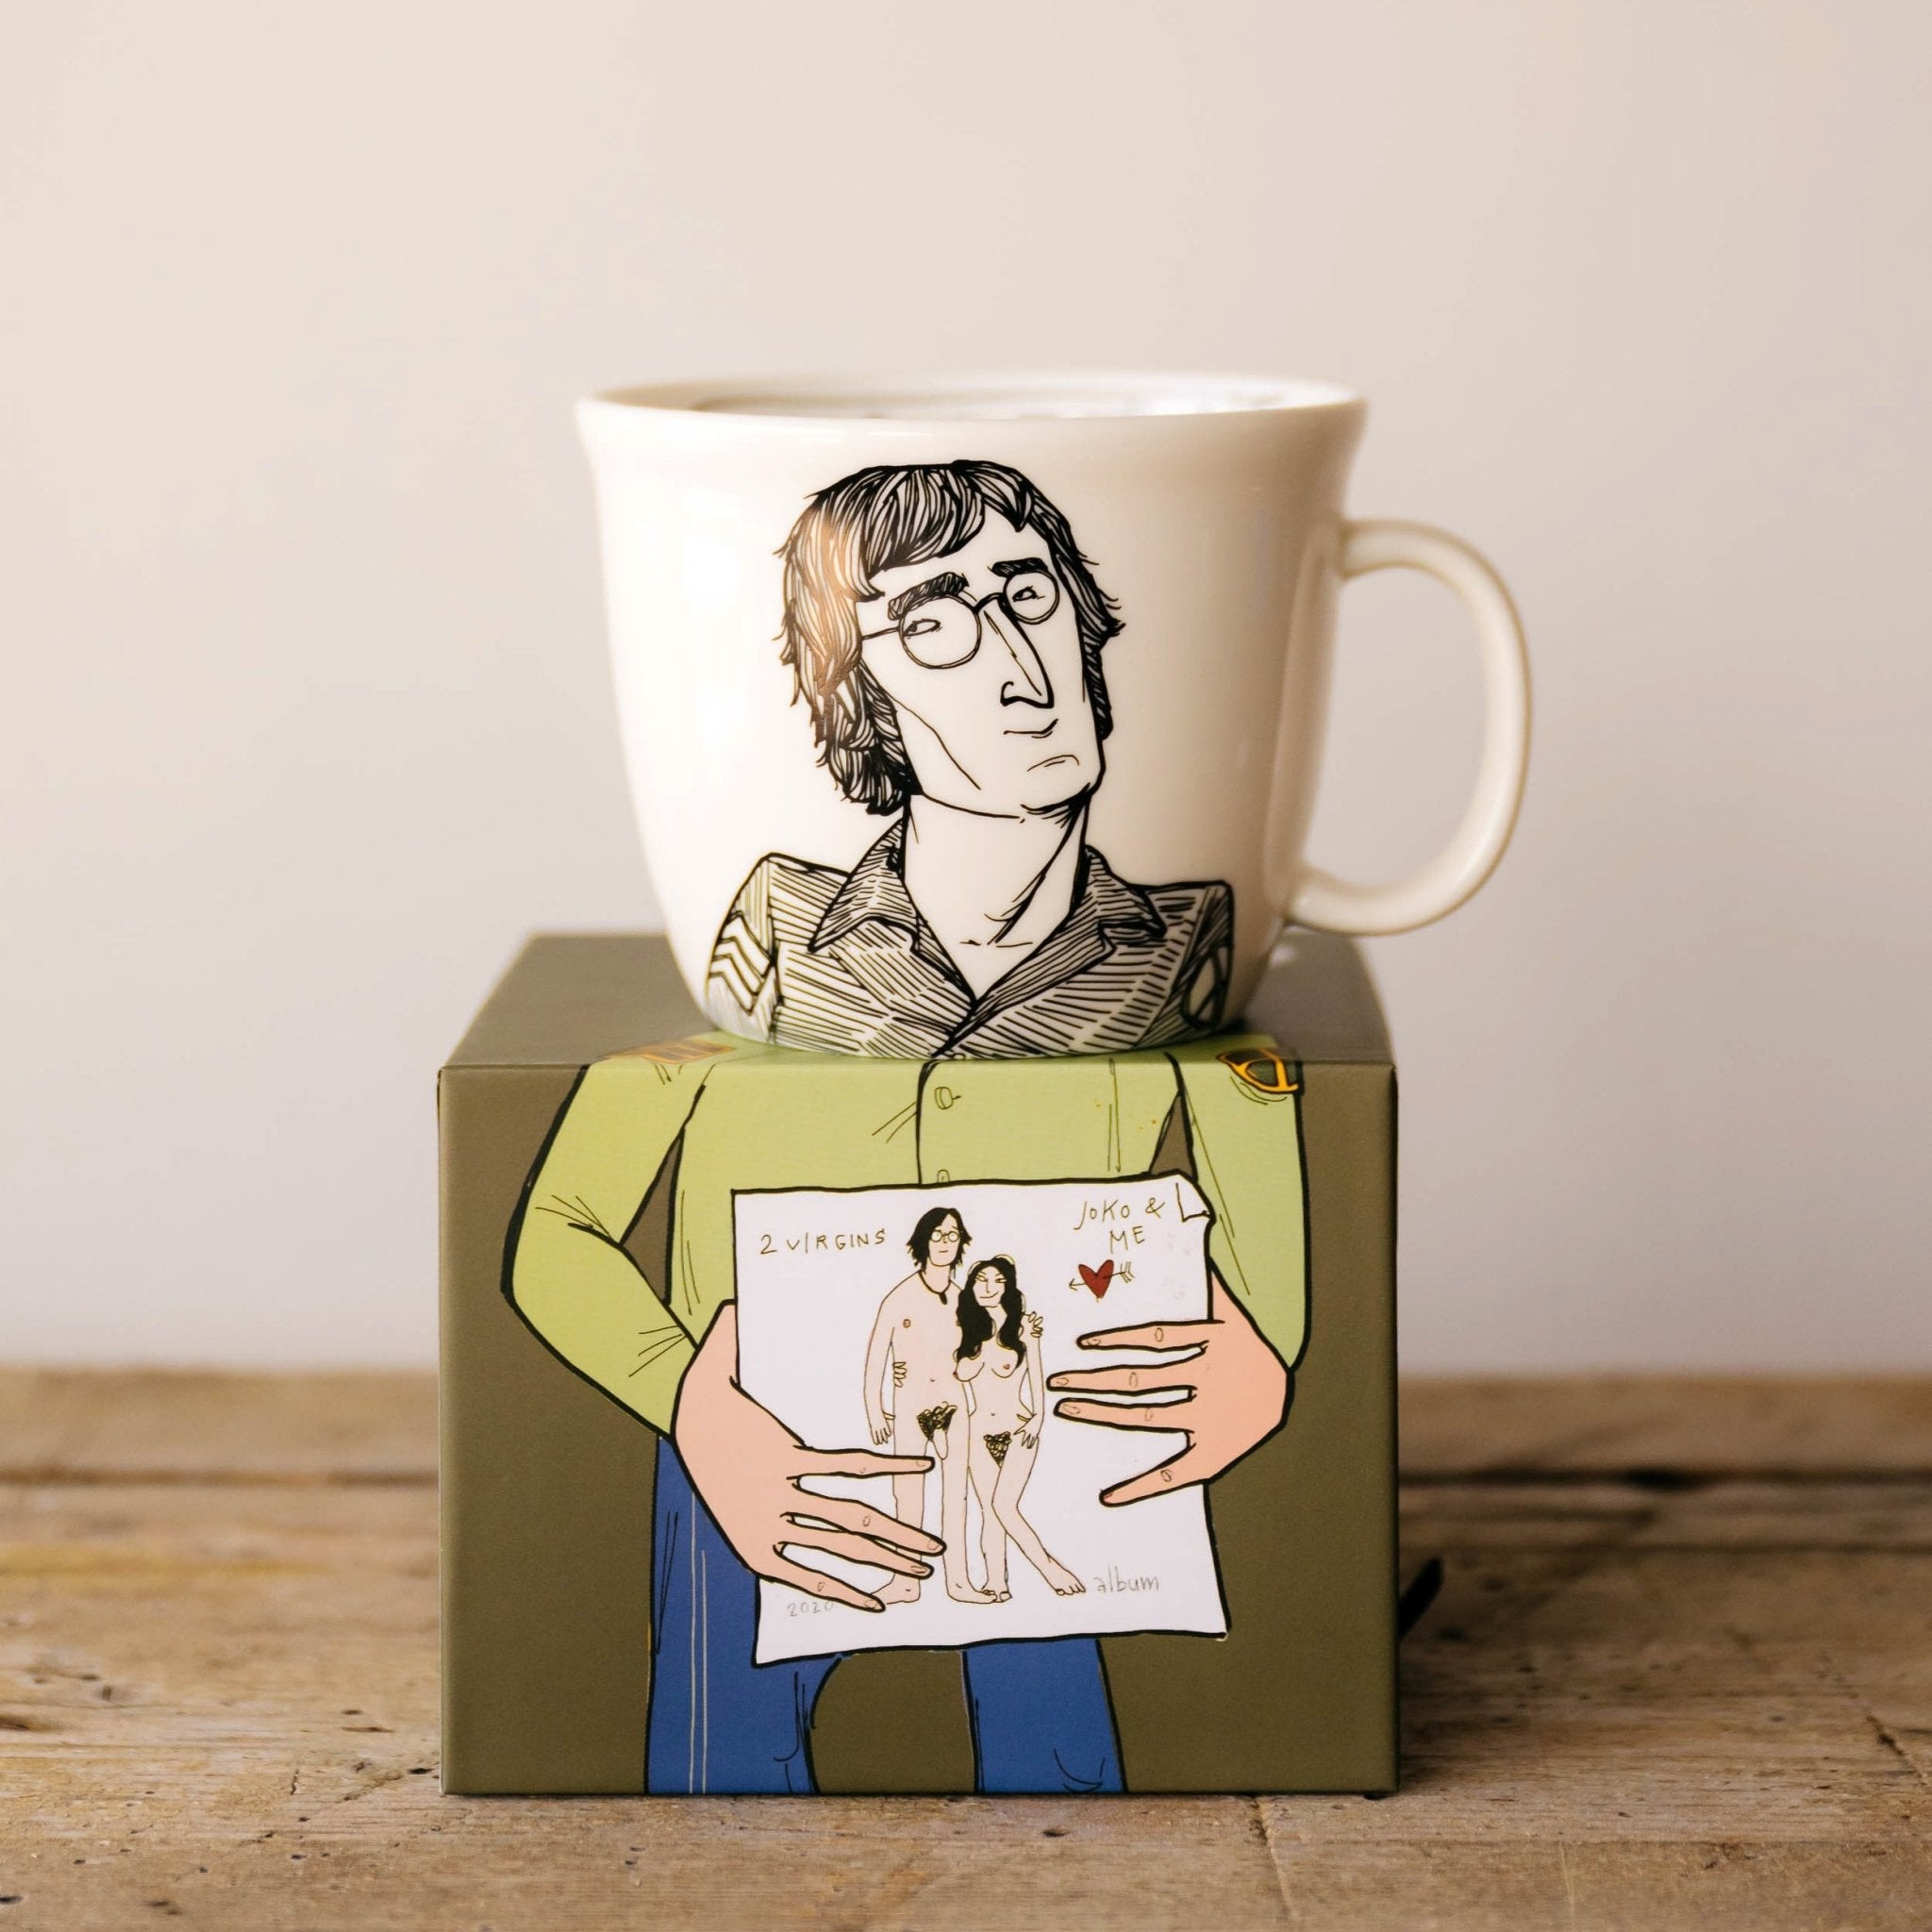 Porcelain cup inspired by John Lennon on the box